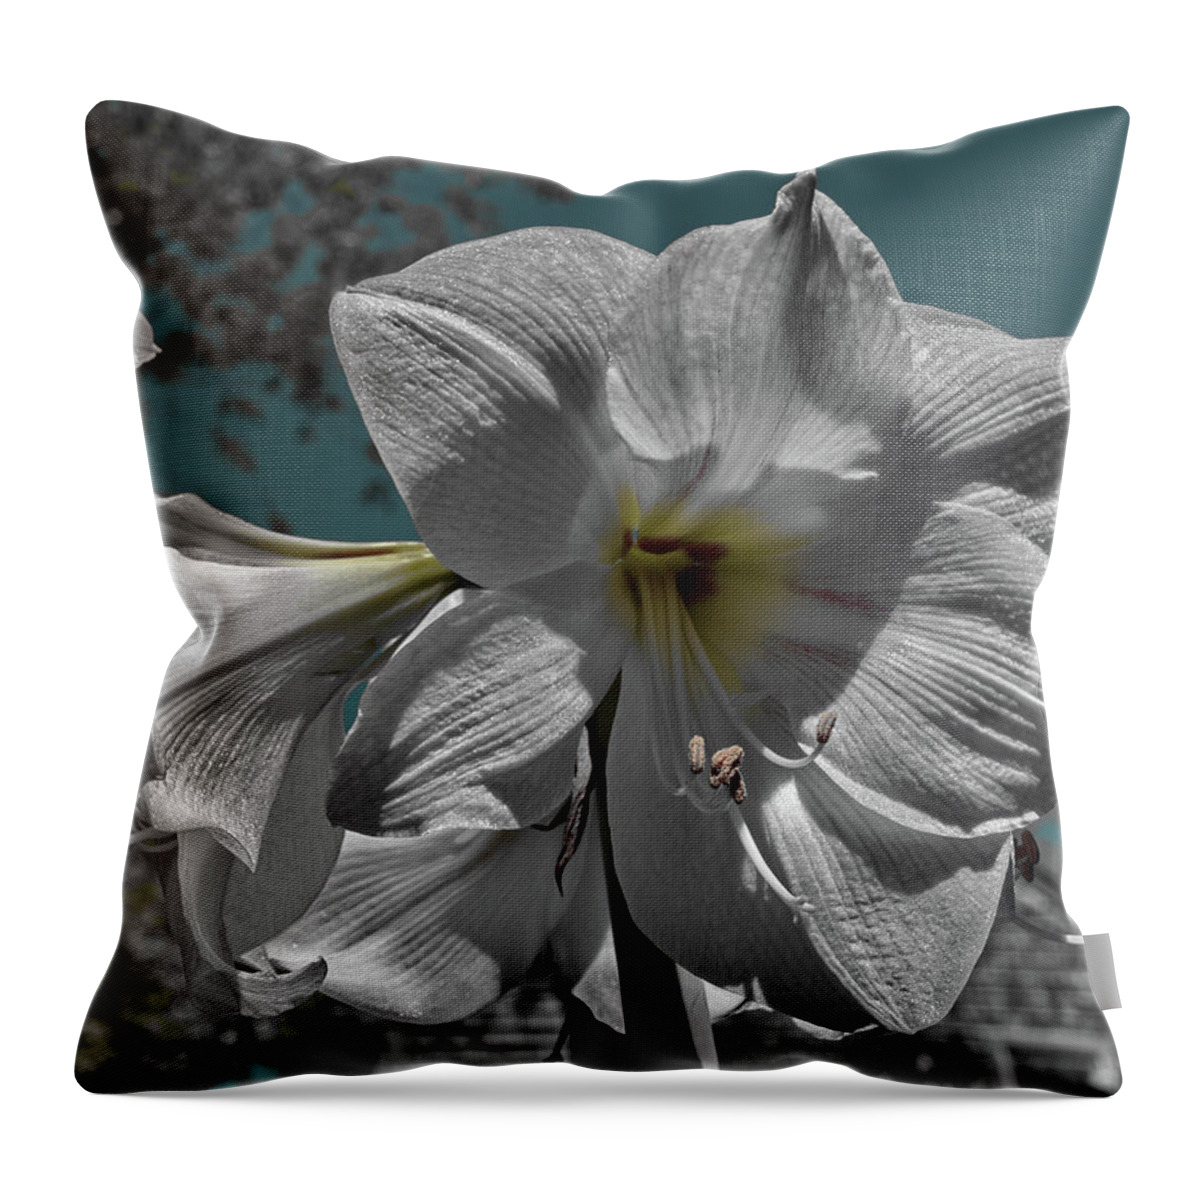 Amaryllis Bloom Throw Pillow featuring the photograph Amaryllis by Barry Doherty